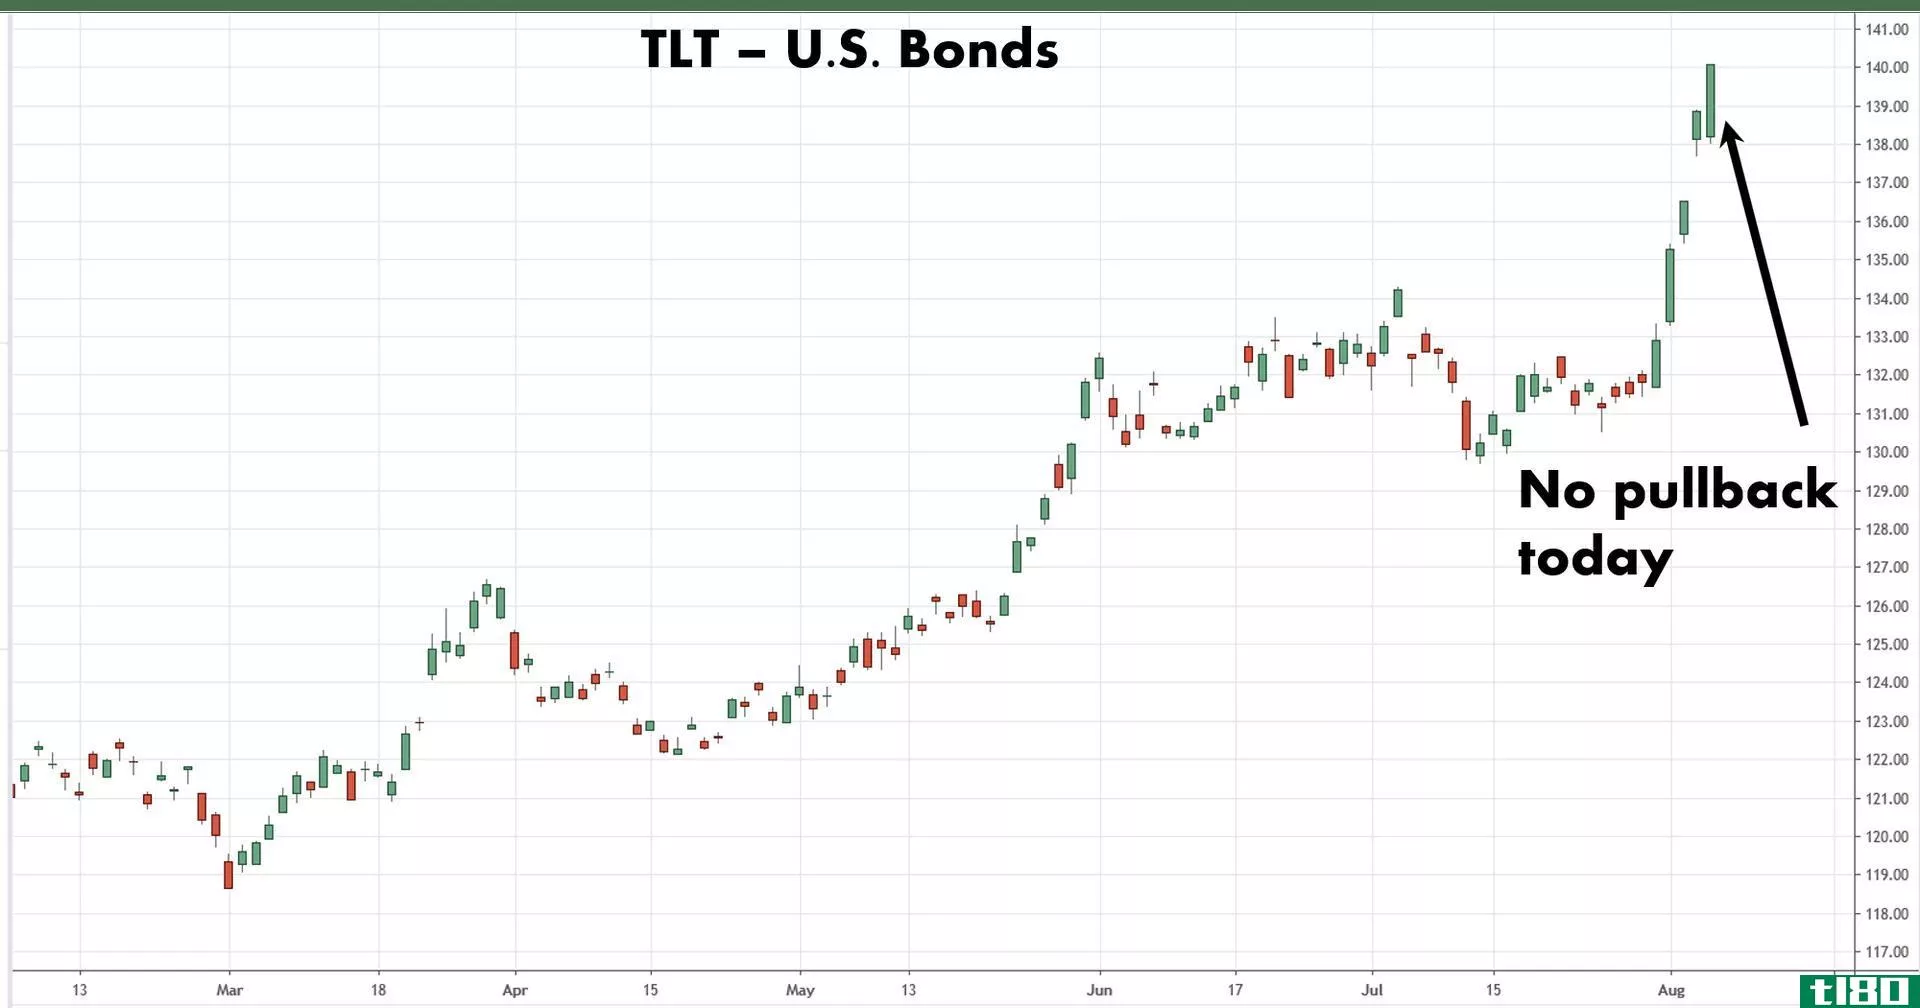 Chart showing the share price performance of the iShares 20+ Year Treasury Bond ETF (TLT)